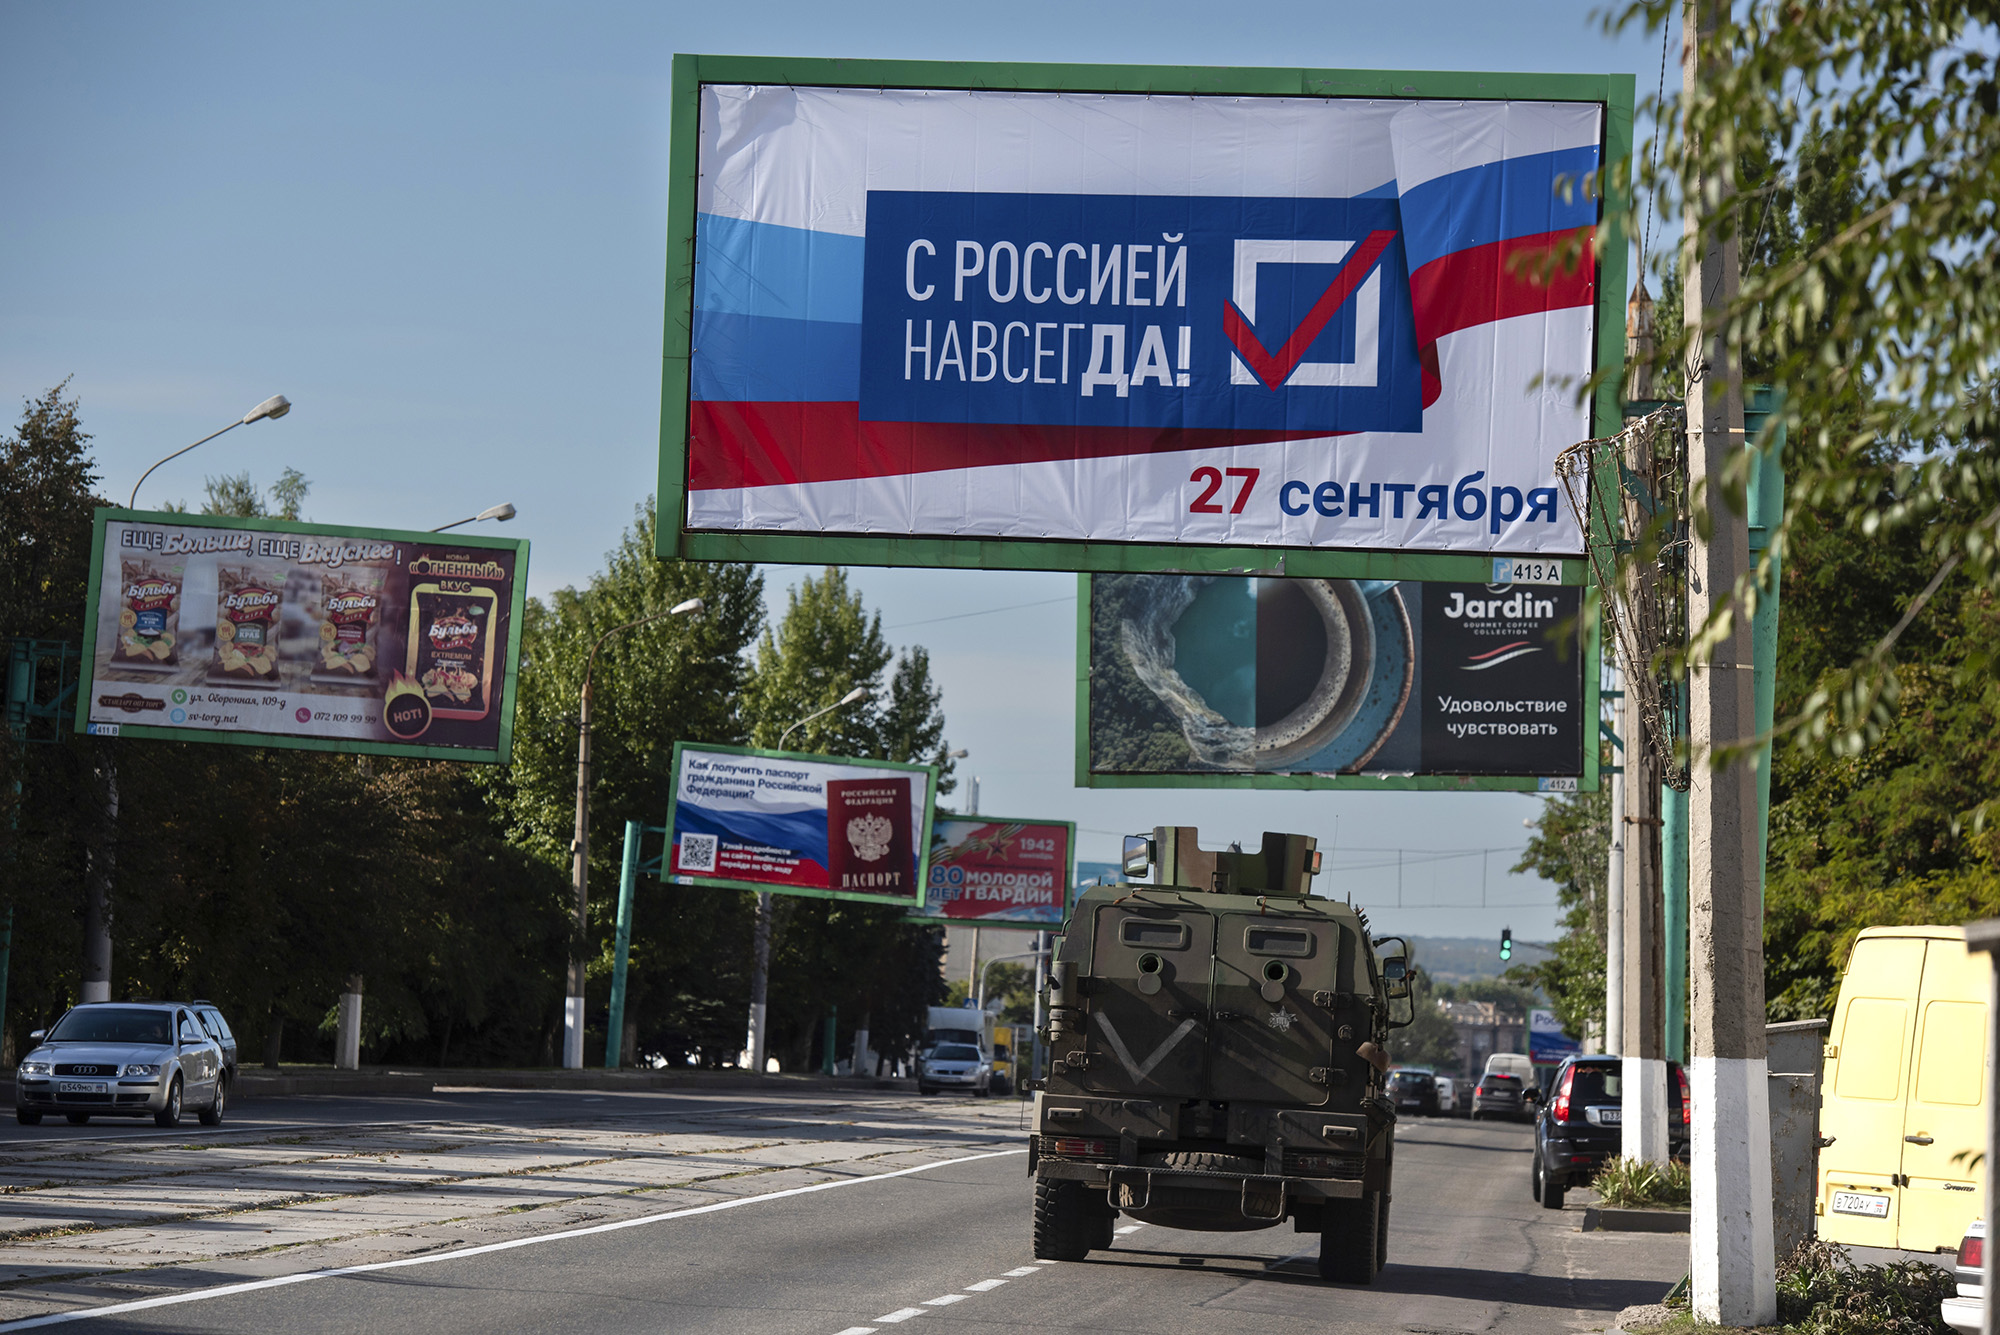 A military vehicle drives along the road with a billboard reading. "Forever With Russia, September 27" Ahead of the September 22 referendum in the eastern Ukrainian city of Luhansk.